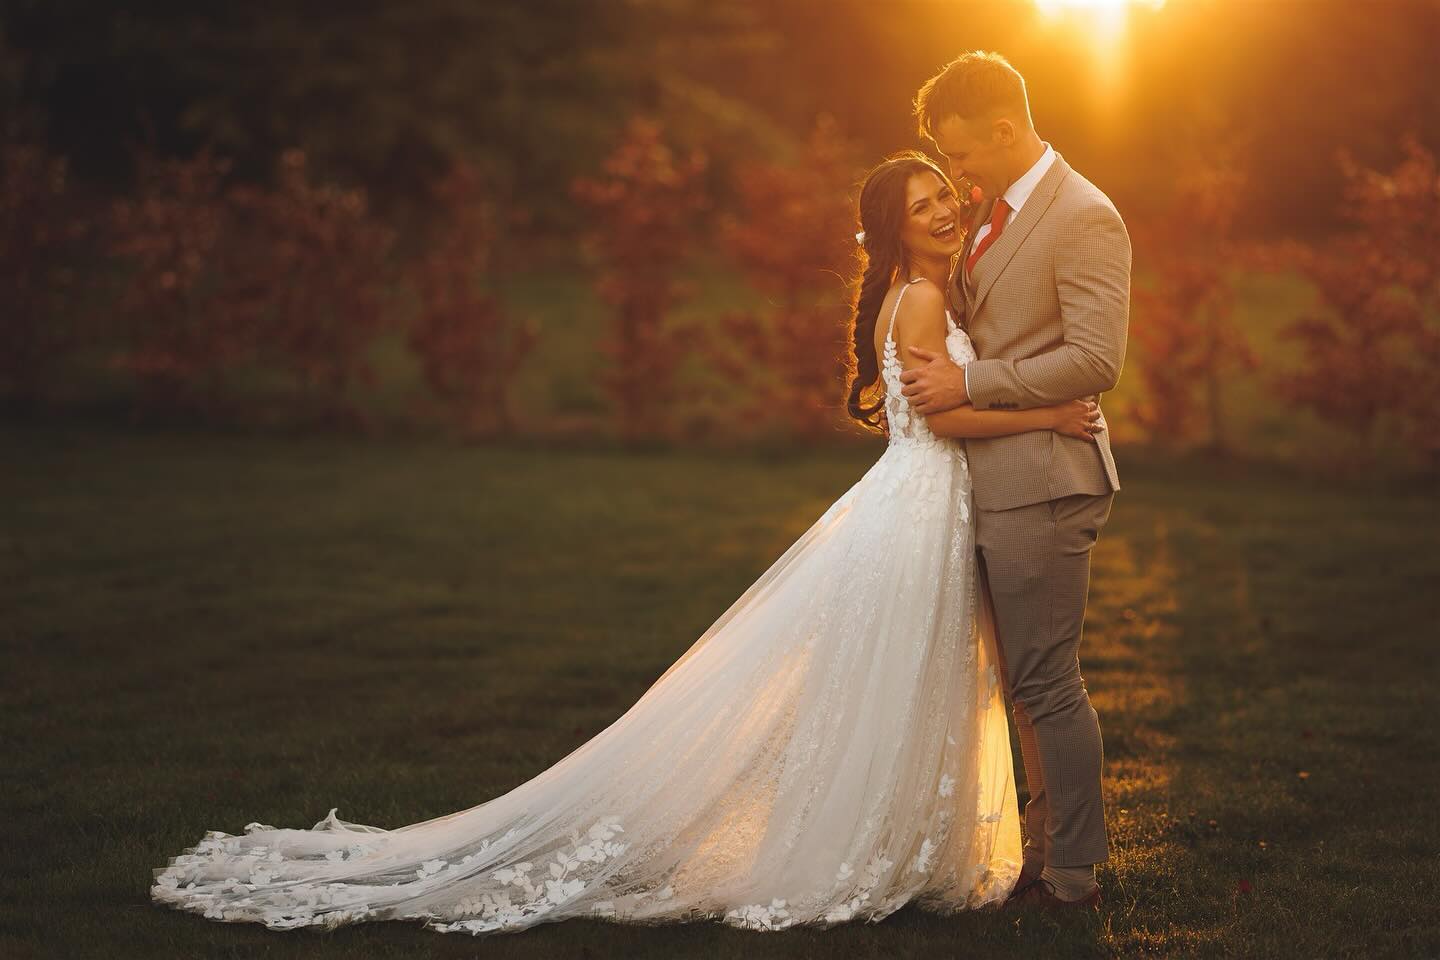 Herefordshire wedding photographer captures a sunset wedding portrait of a bride and groom at Bredenbury Court Barns in Herefordshire.